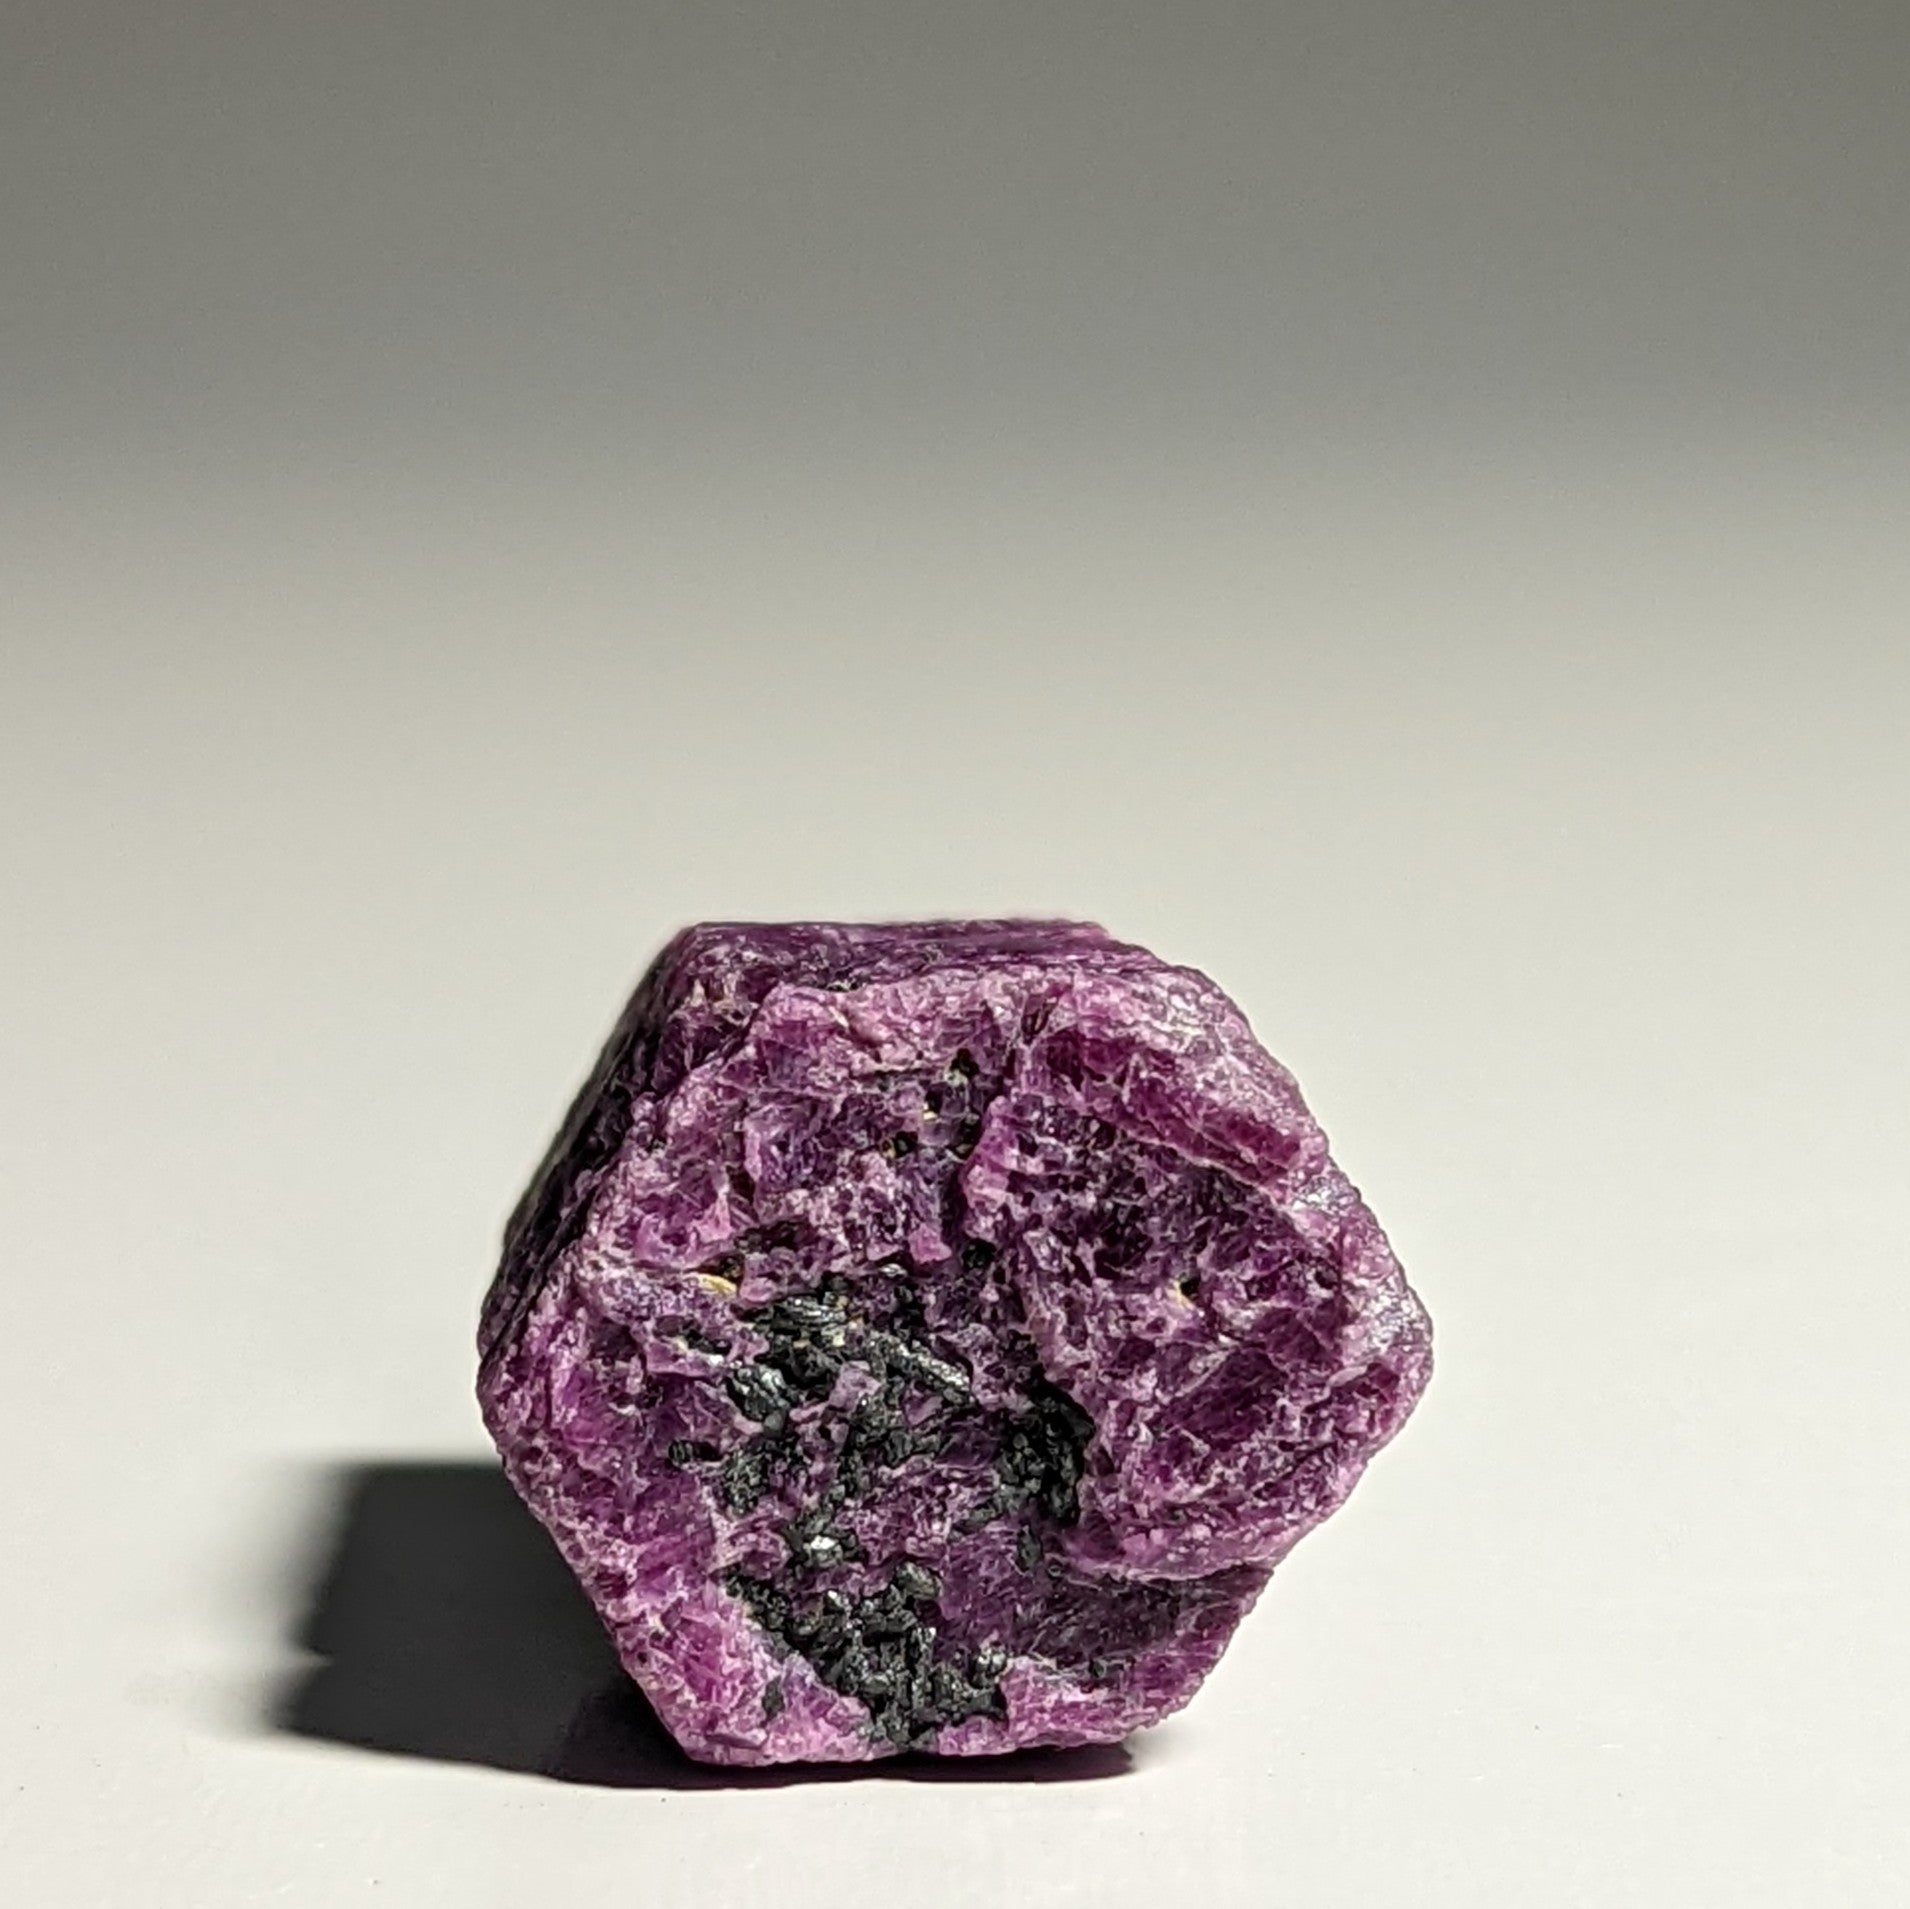 Natural Ruby Corundum with Bright Pink and Red Hues and Stunning Hexagonal Structure